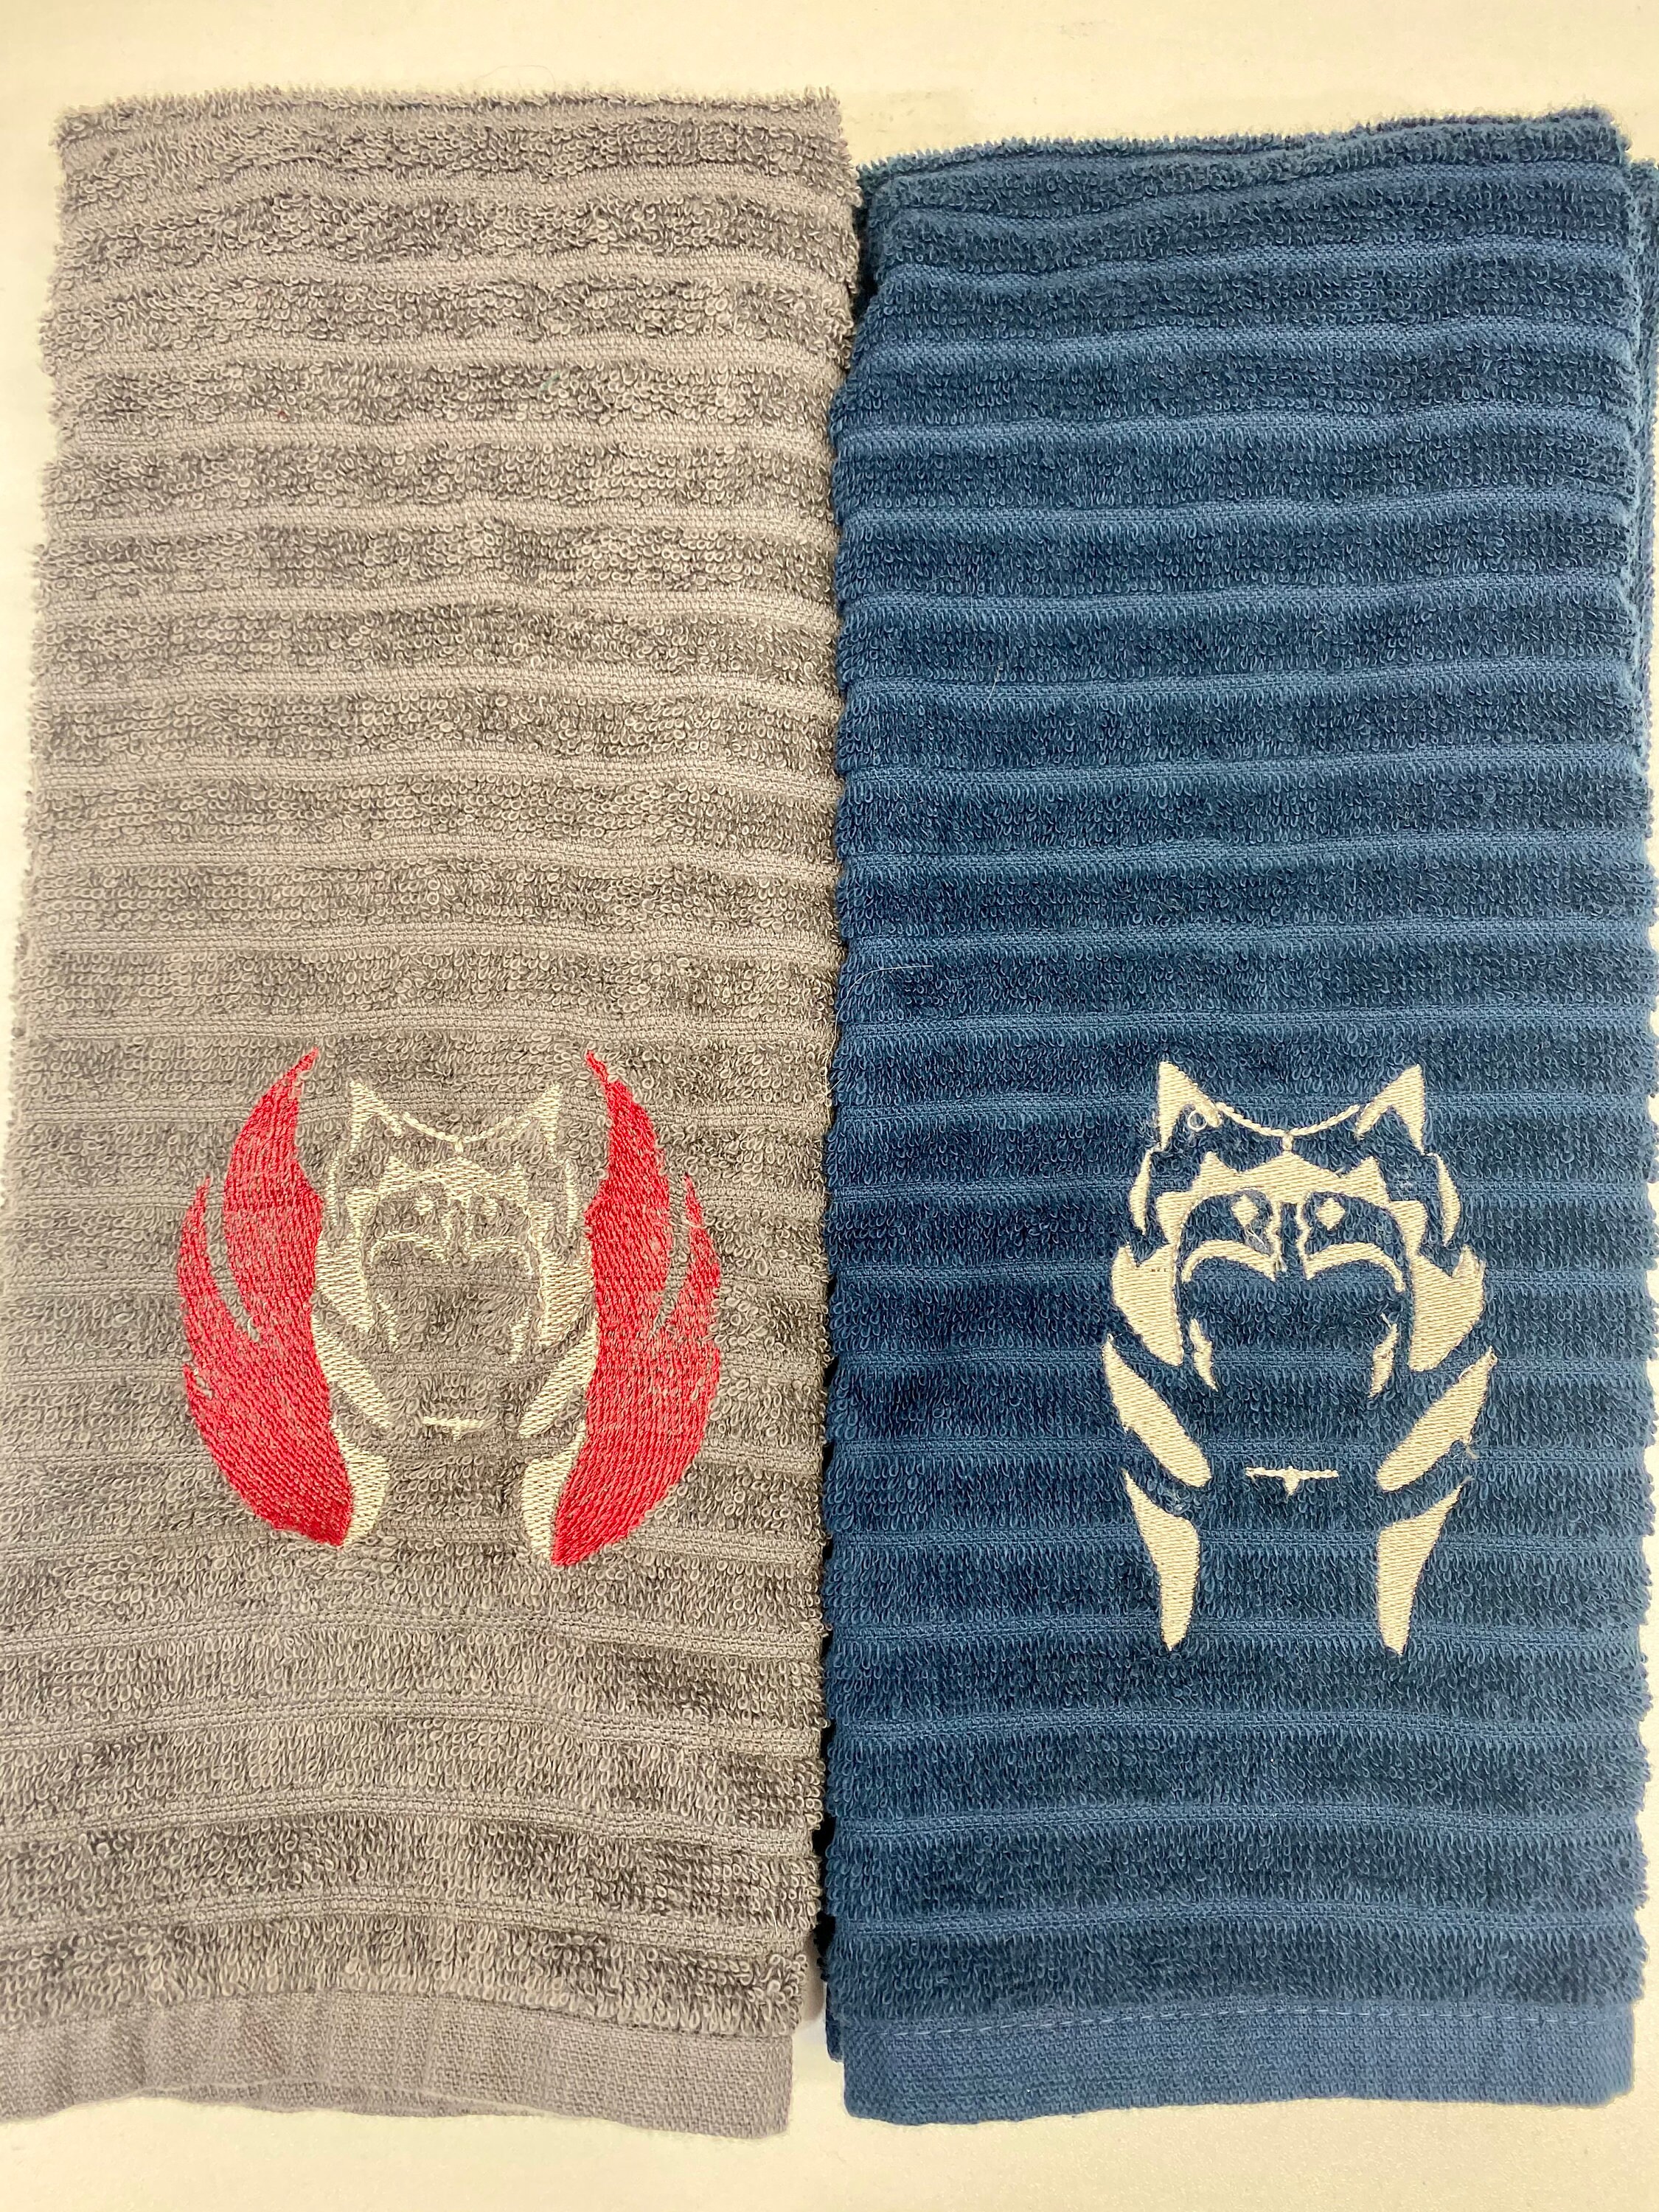 Star Wars Quotes - HomeTow Star Wars Hand Bathroom Towels